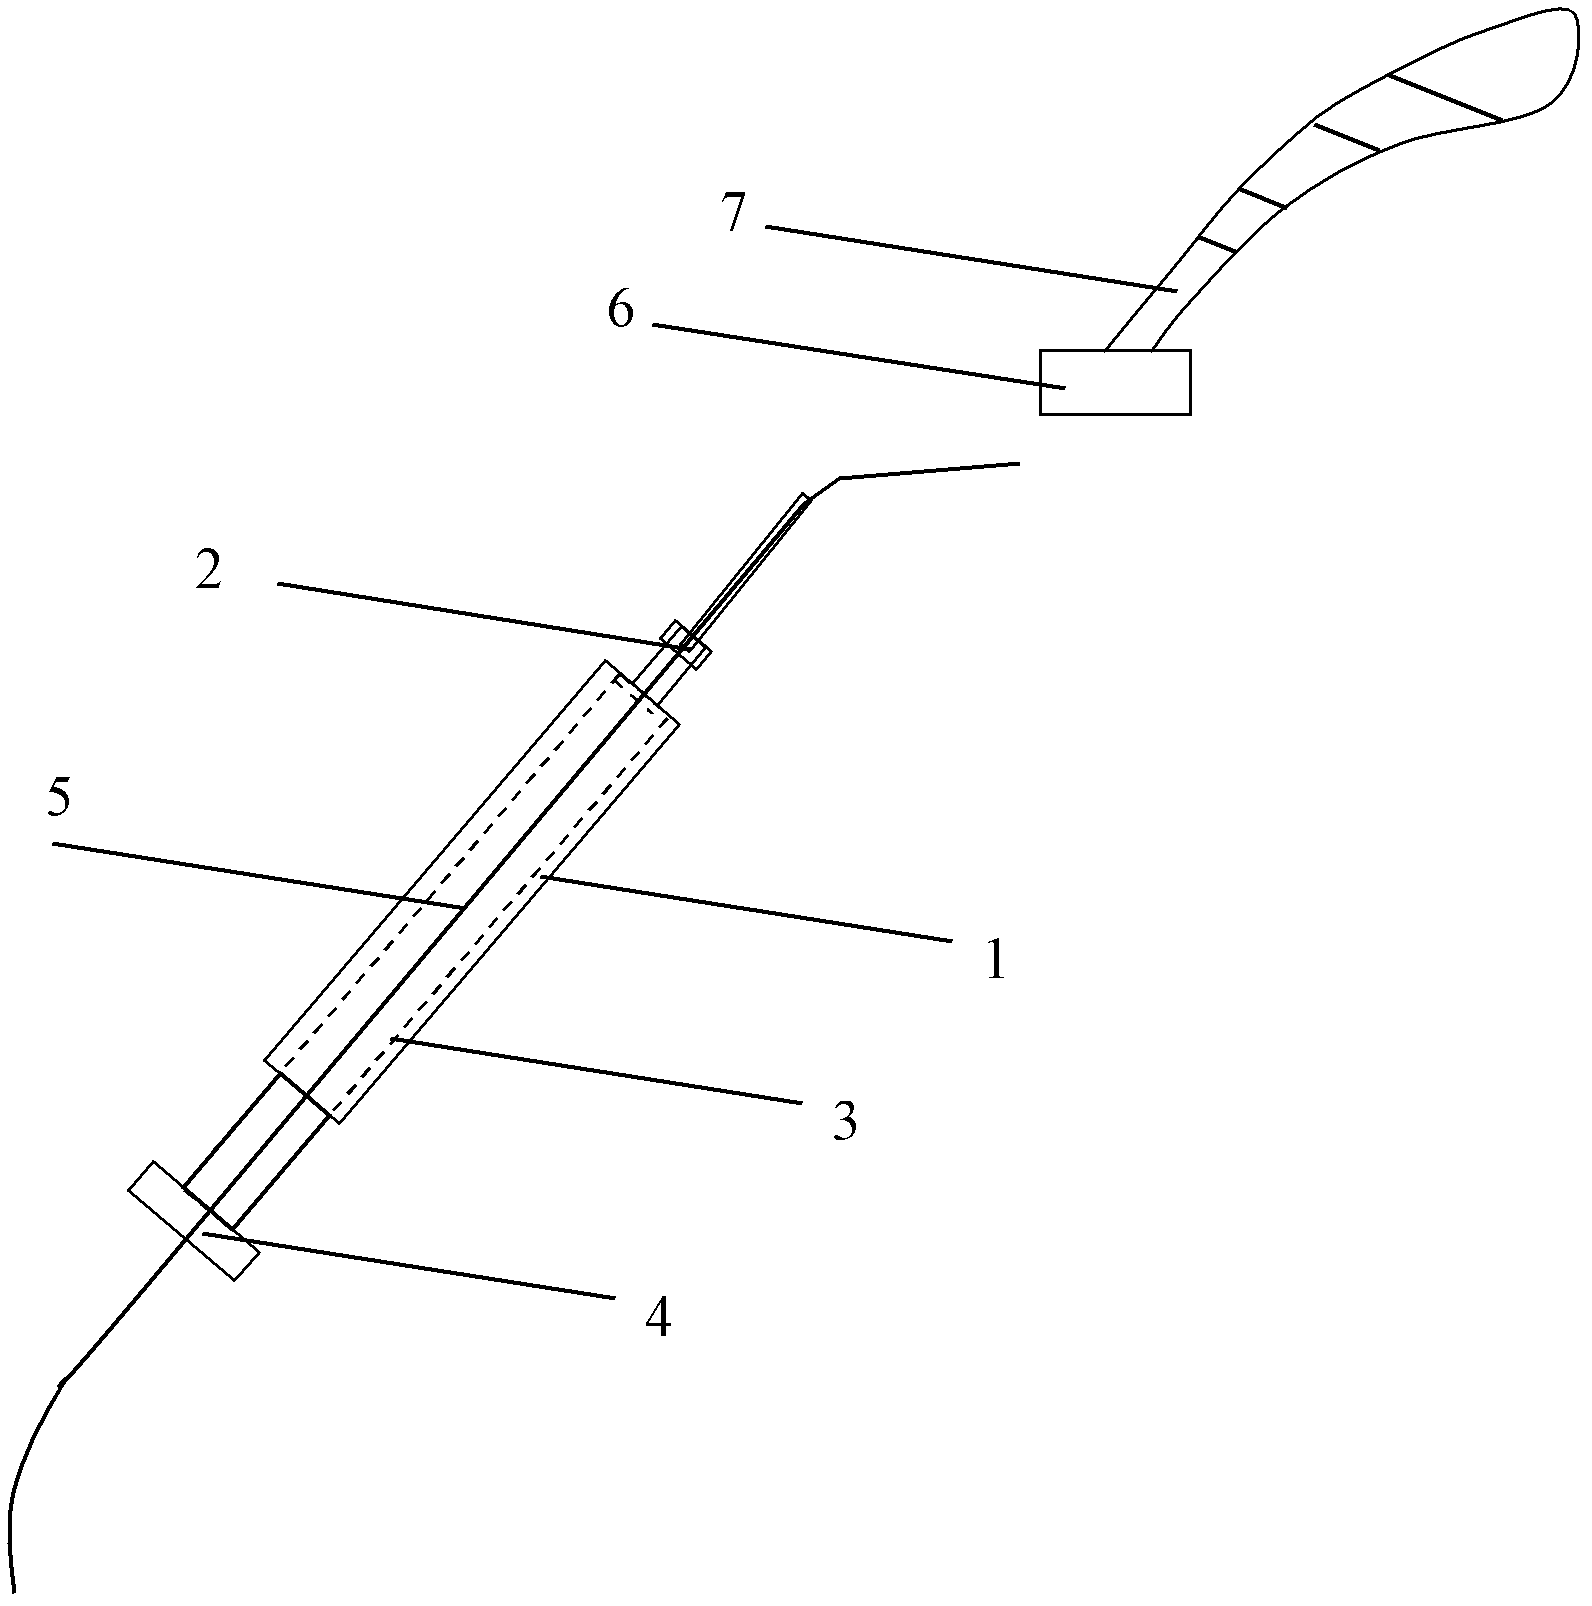 Guiding steel wire guiding method and device in subclavian vein catheterization